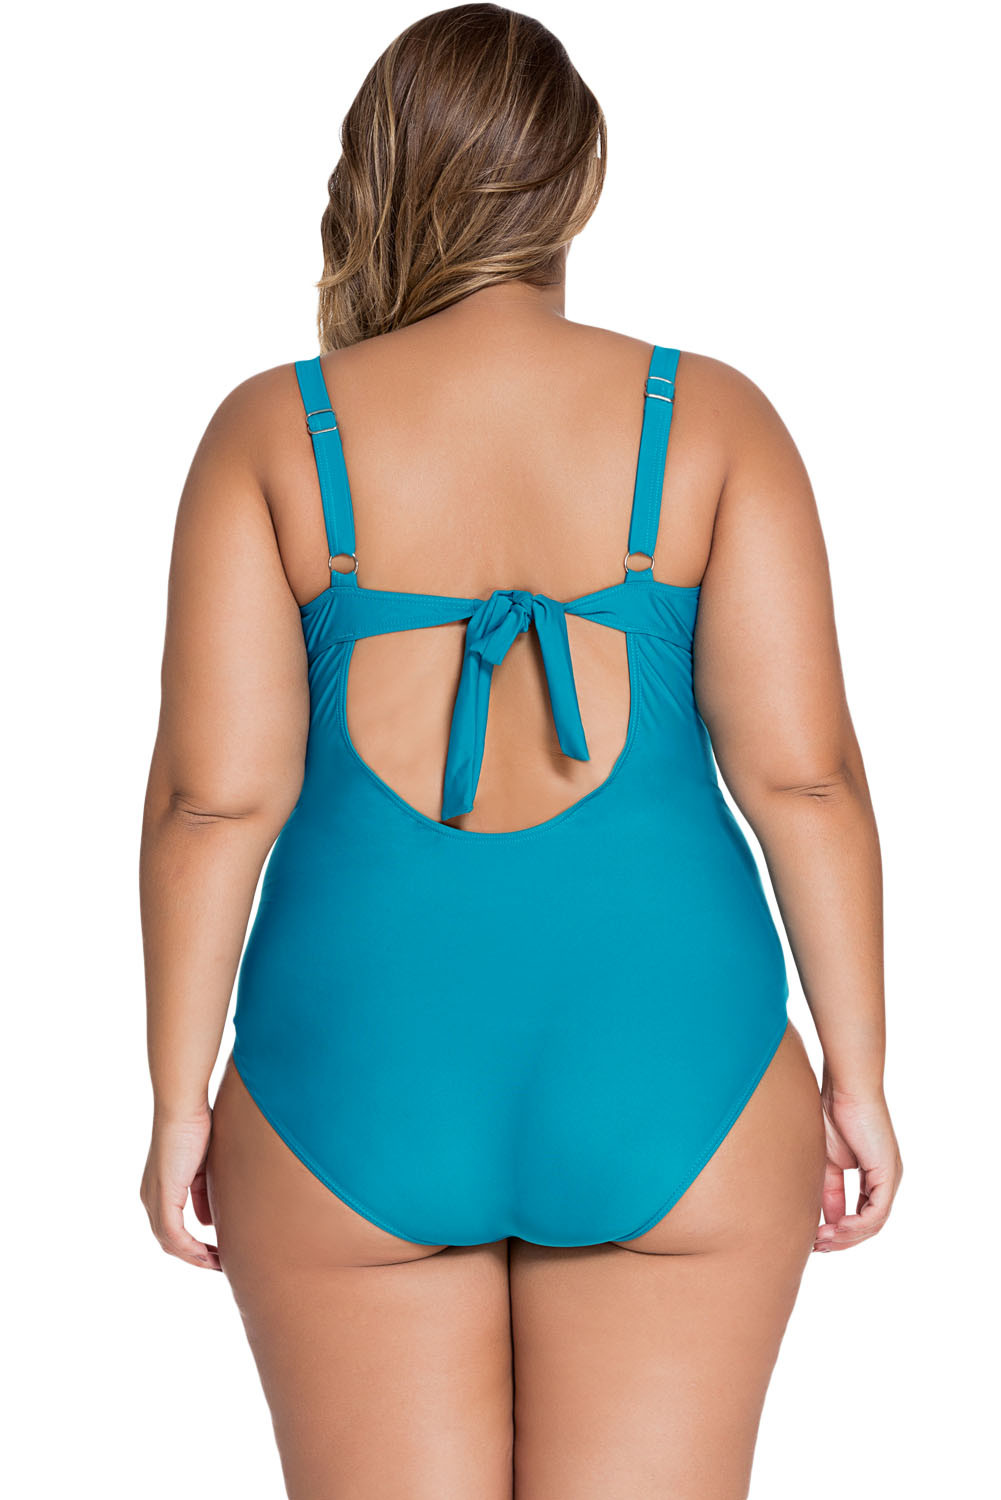 Summer-Plus-Size-Steel-Ring-Push-Up-Swimsuit-Suspenders-Backless-Sexy-Swimwear-1110048-9